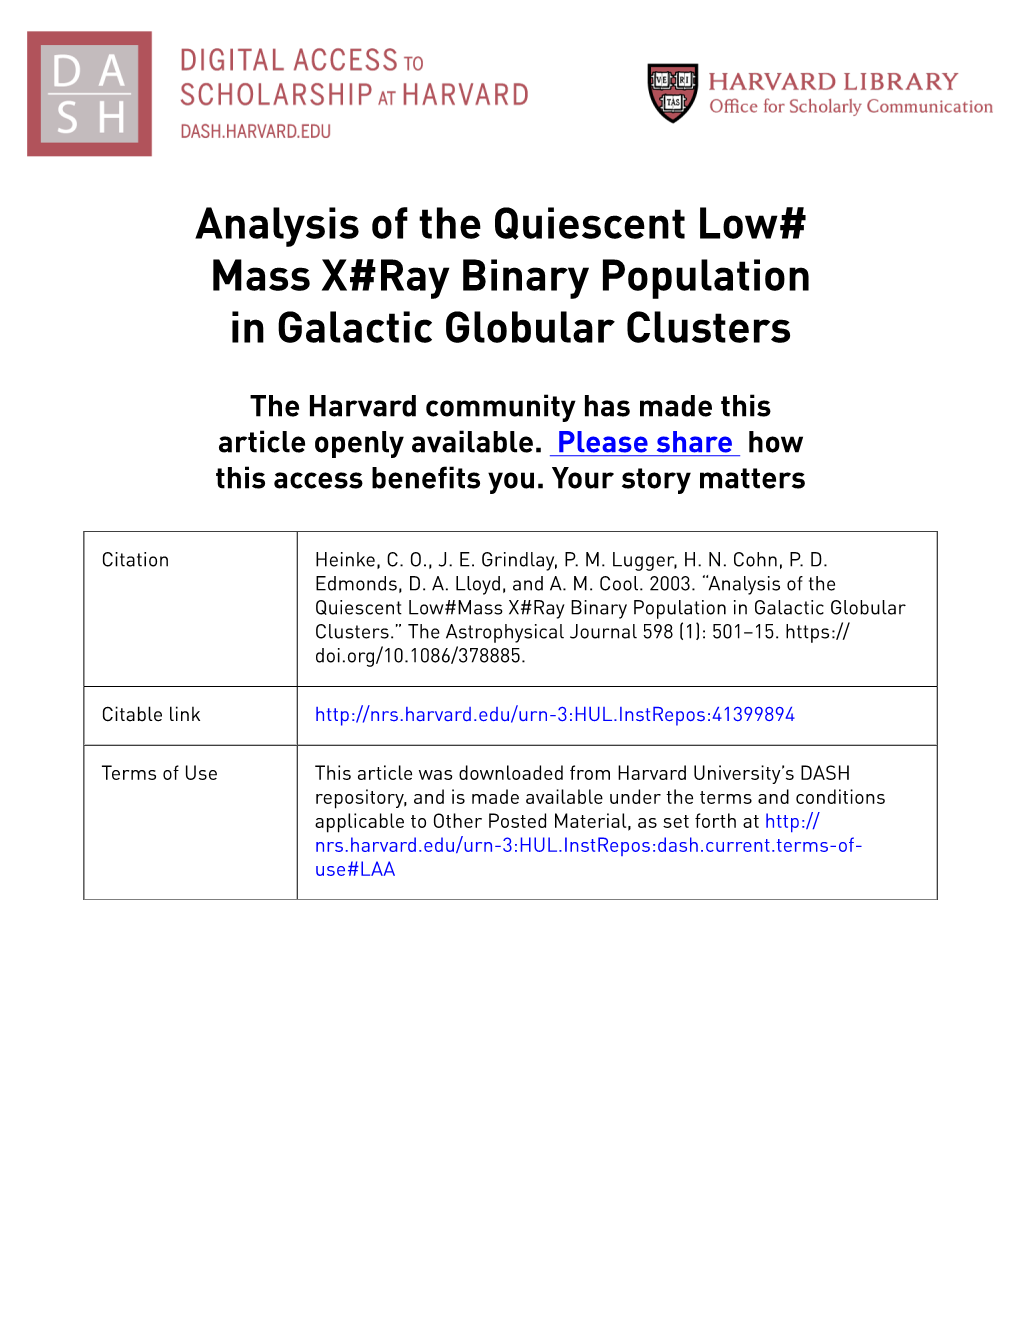 Analysis of the Quiescent Low# Mass X#Ray Binary Population in Galactic Globular Clusters